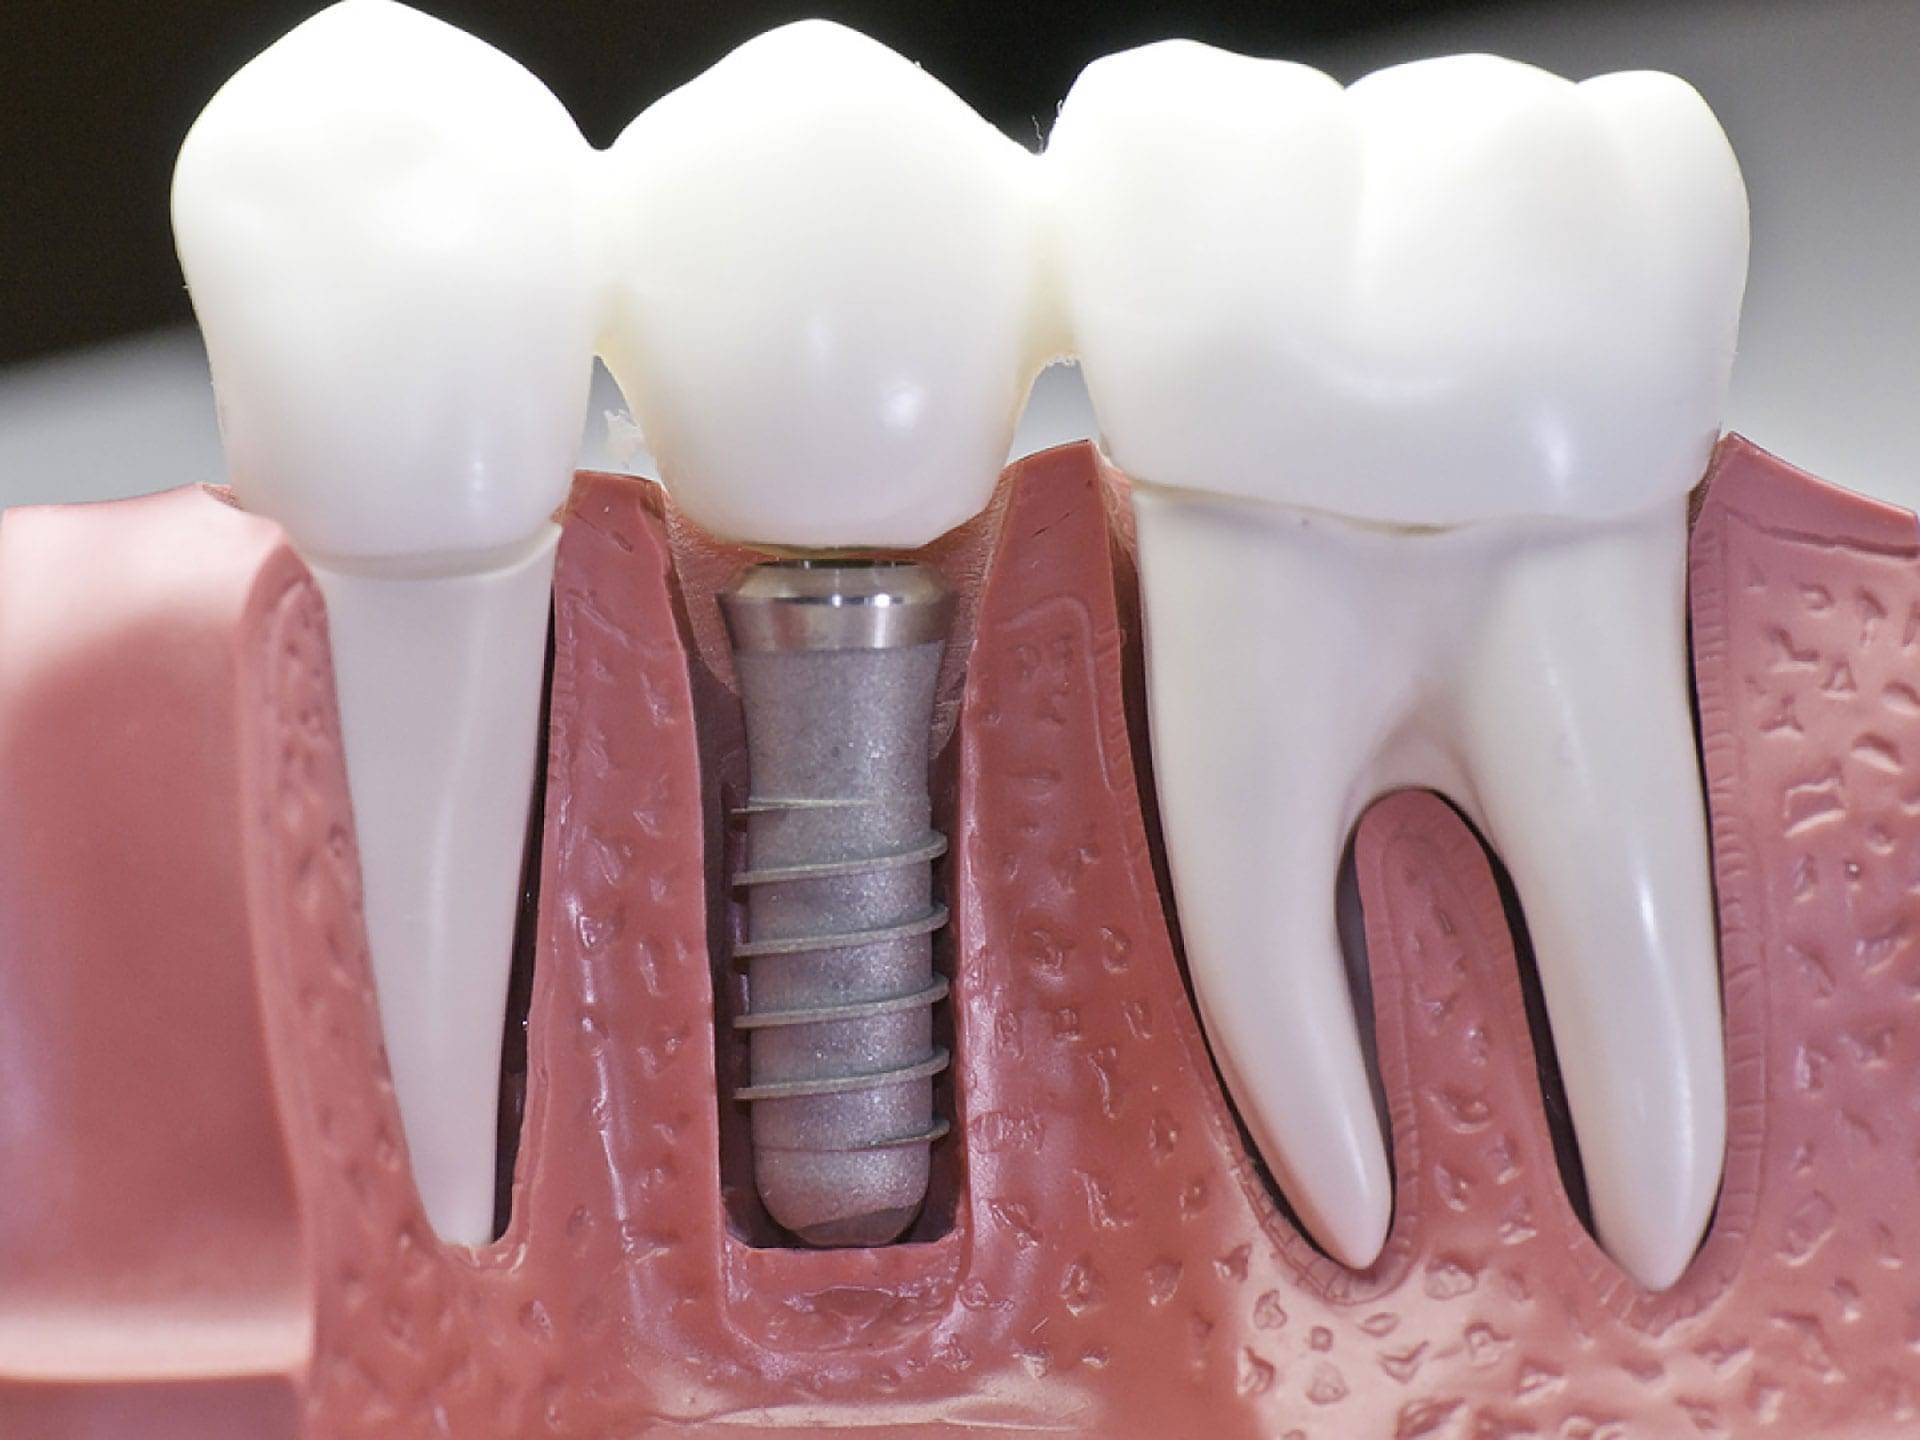 Dental and Denture Care Center Dental Implants Can Change Your Life